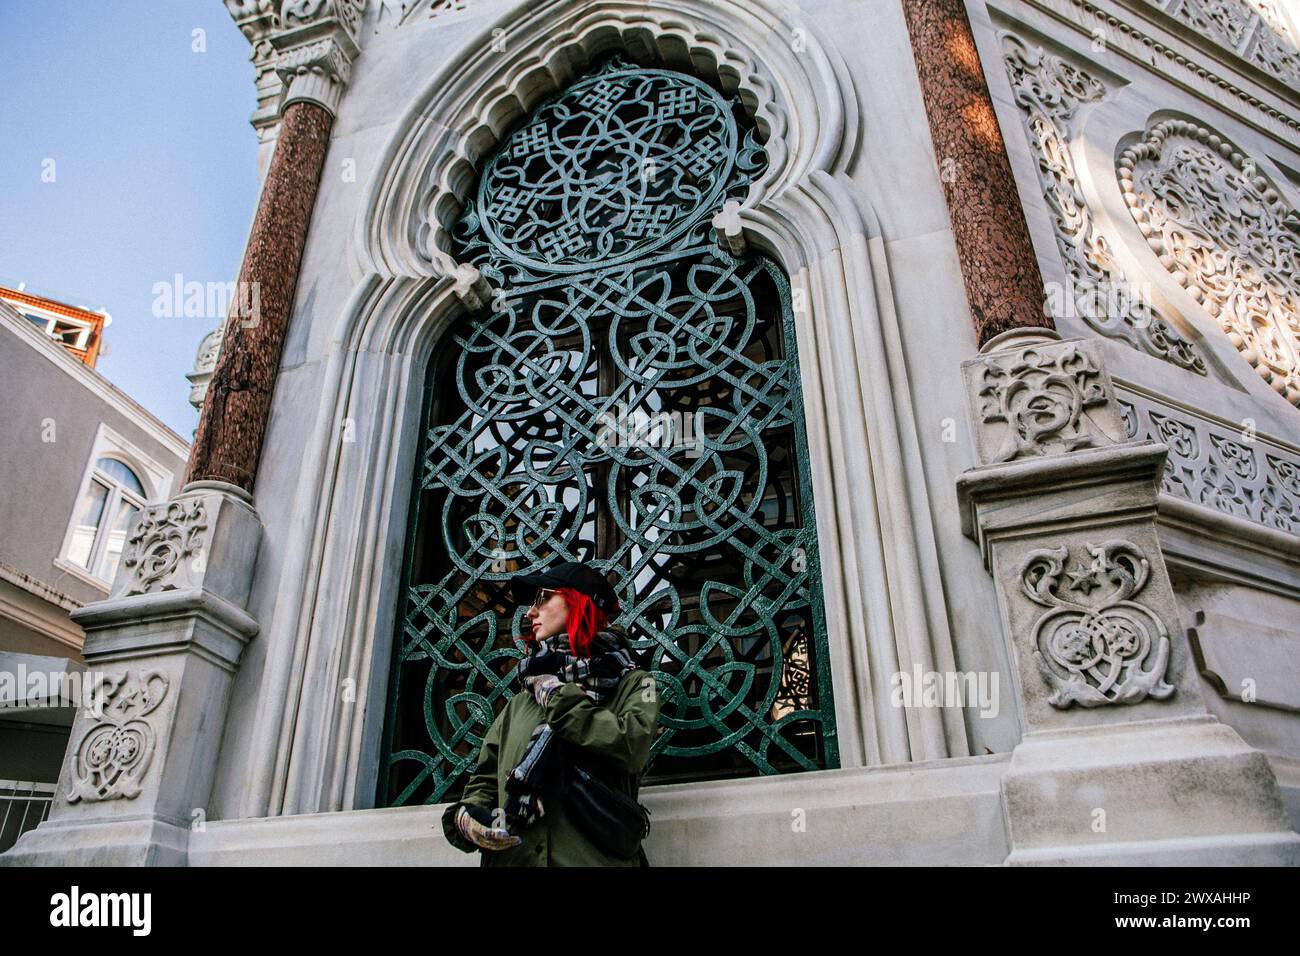 A person with a red headscarf looking through an intricate gothic window on a decorative stone facade Stock Photo